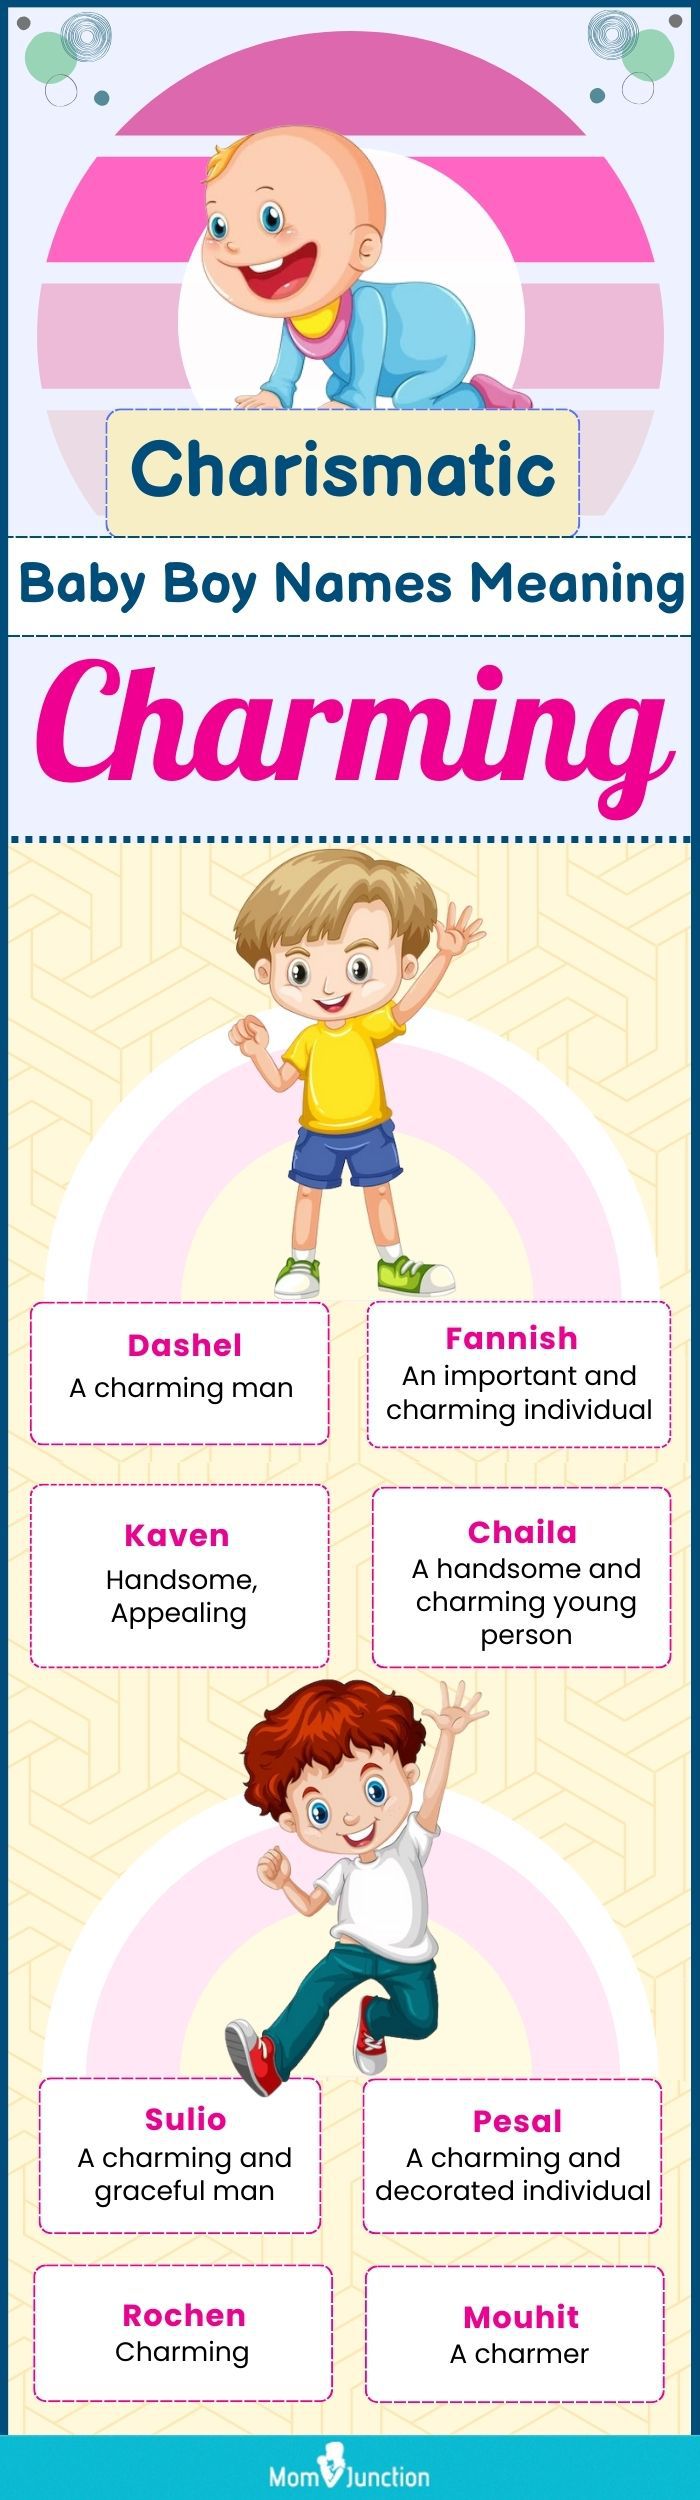 charismatic baby boy names meaning charming (infographic)